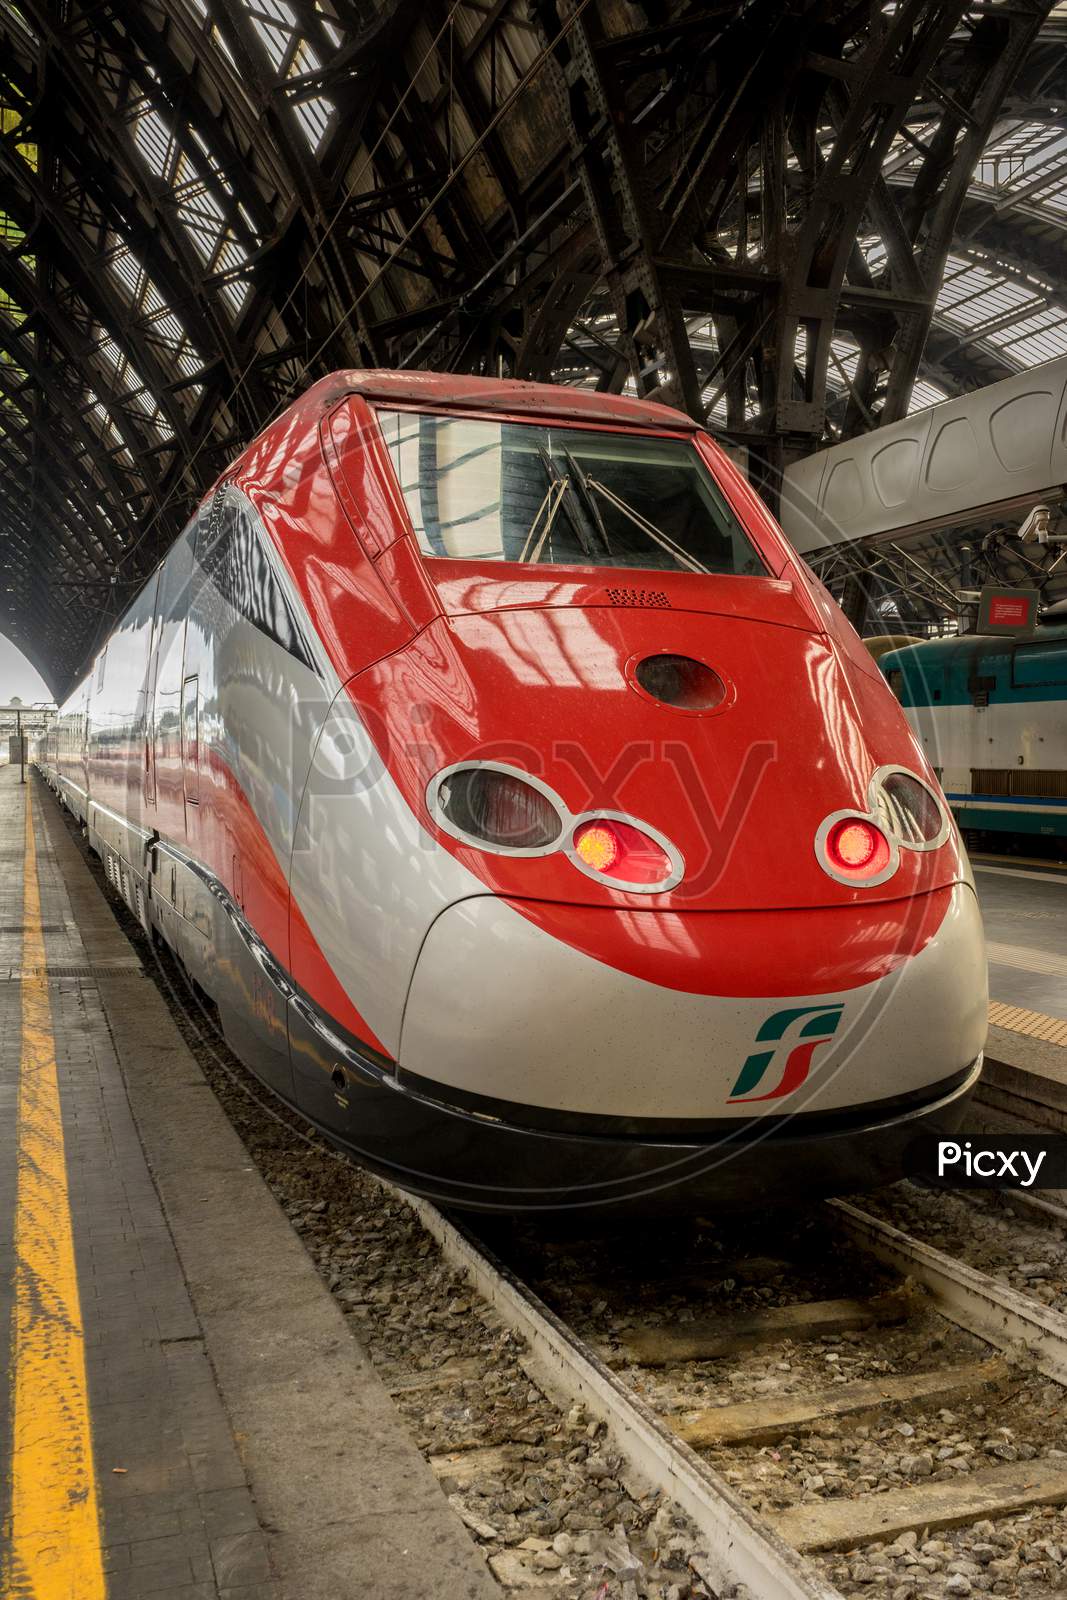 Milan Central Station - March 31: The Frecciarossa Trenitalia At Milan Central Railway Station On March 31, 2018 In Milan, Italy. The Milan Railway Station Is The Largest Train Station In Europe By Volume